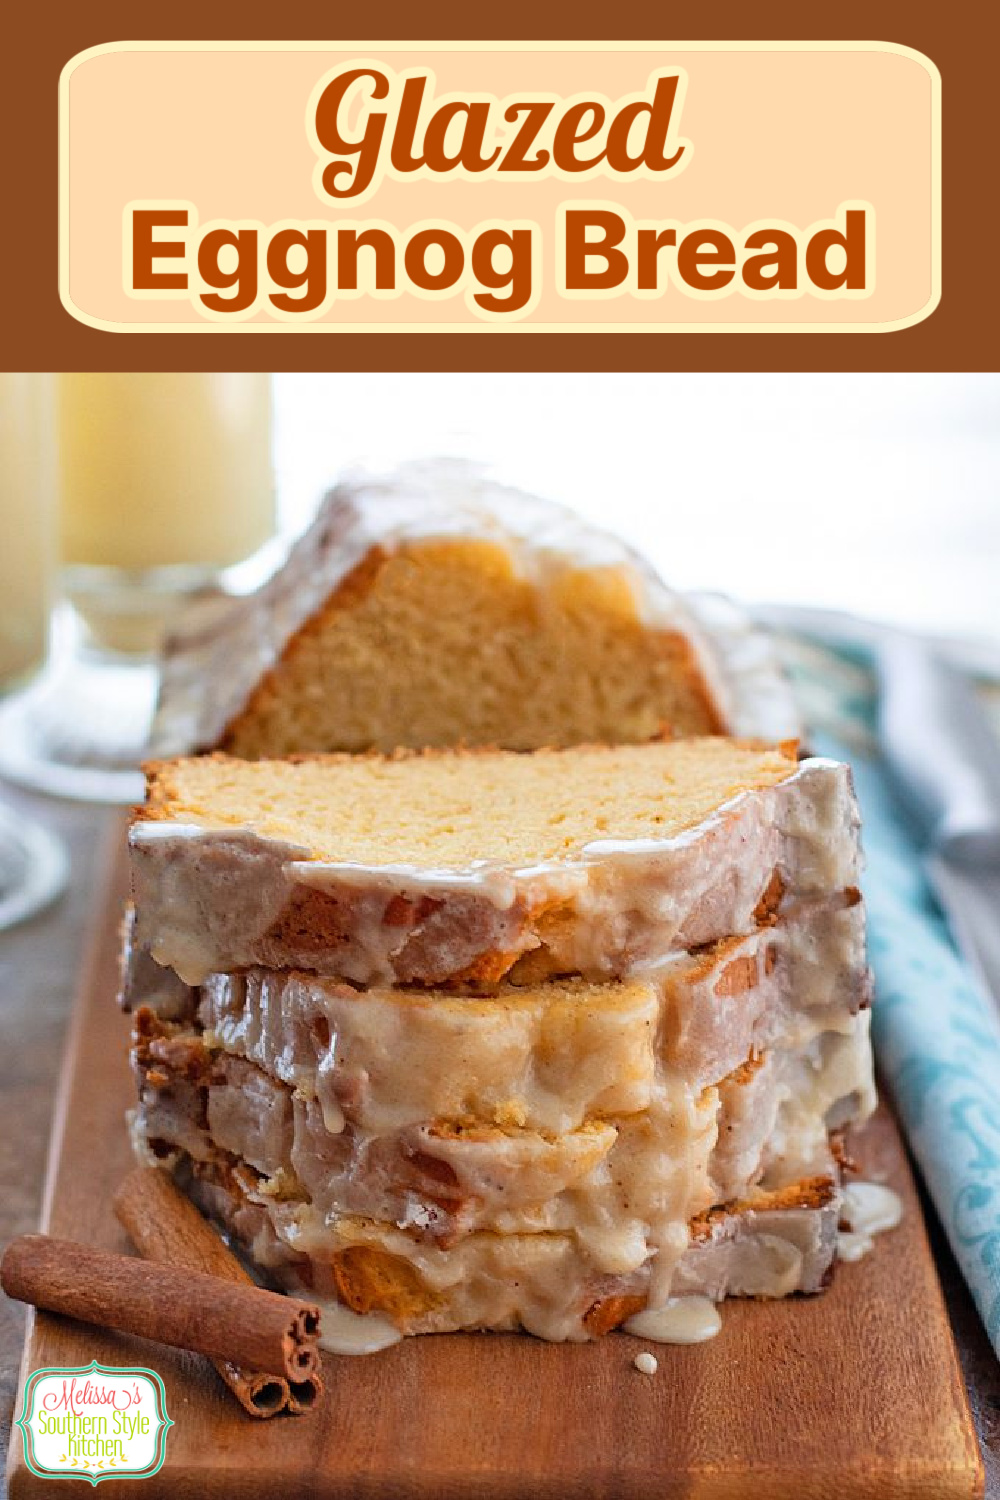 This decadent Glazed Eggnog Bread recipe results in a sweet cake-like treat that's perfect for breakfast, brunch dessert or as a mid morning treat #eggnog #eggnogbread #eggnogdesserts #quickbread #eggnogquickbread #eggnogbreadrecipe